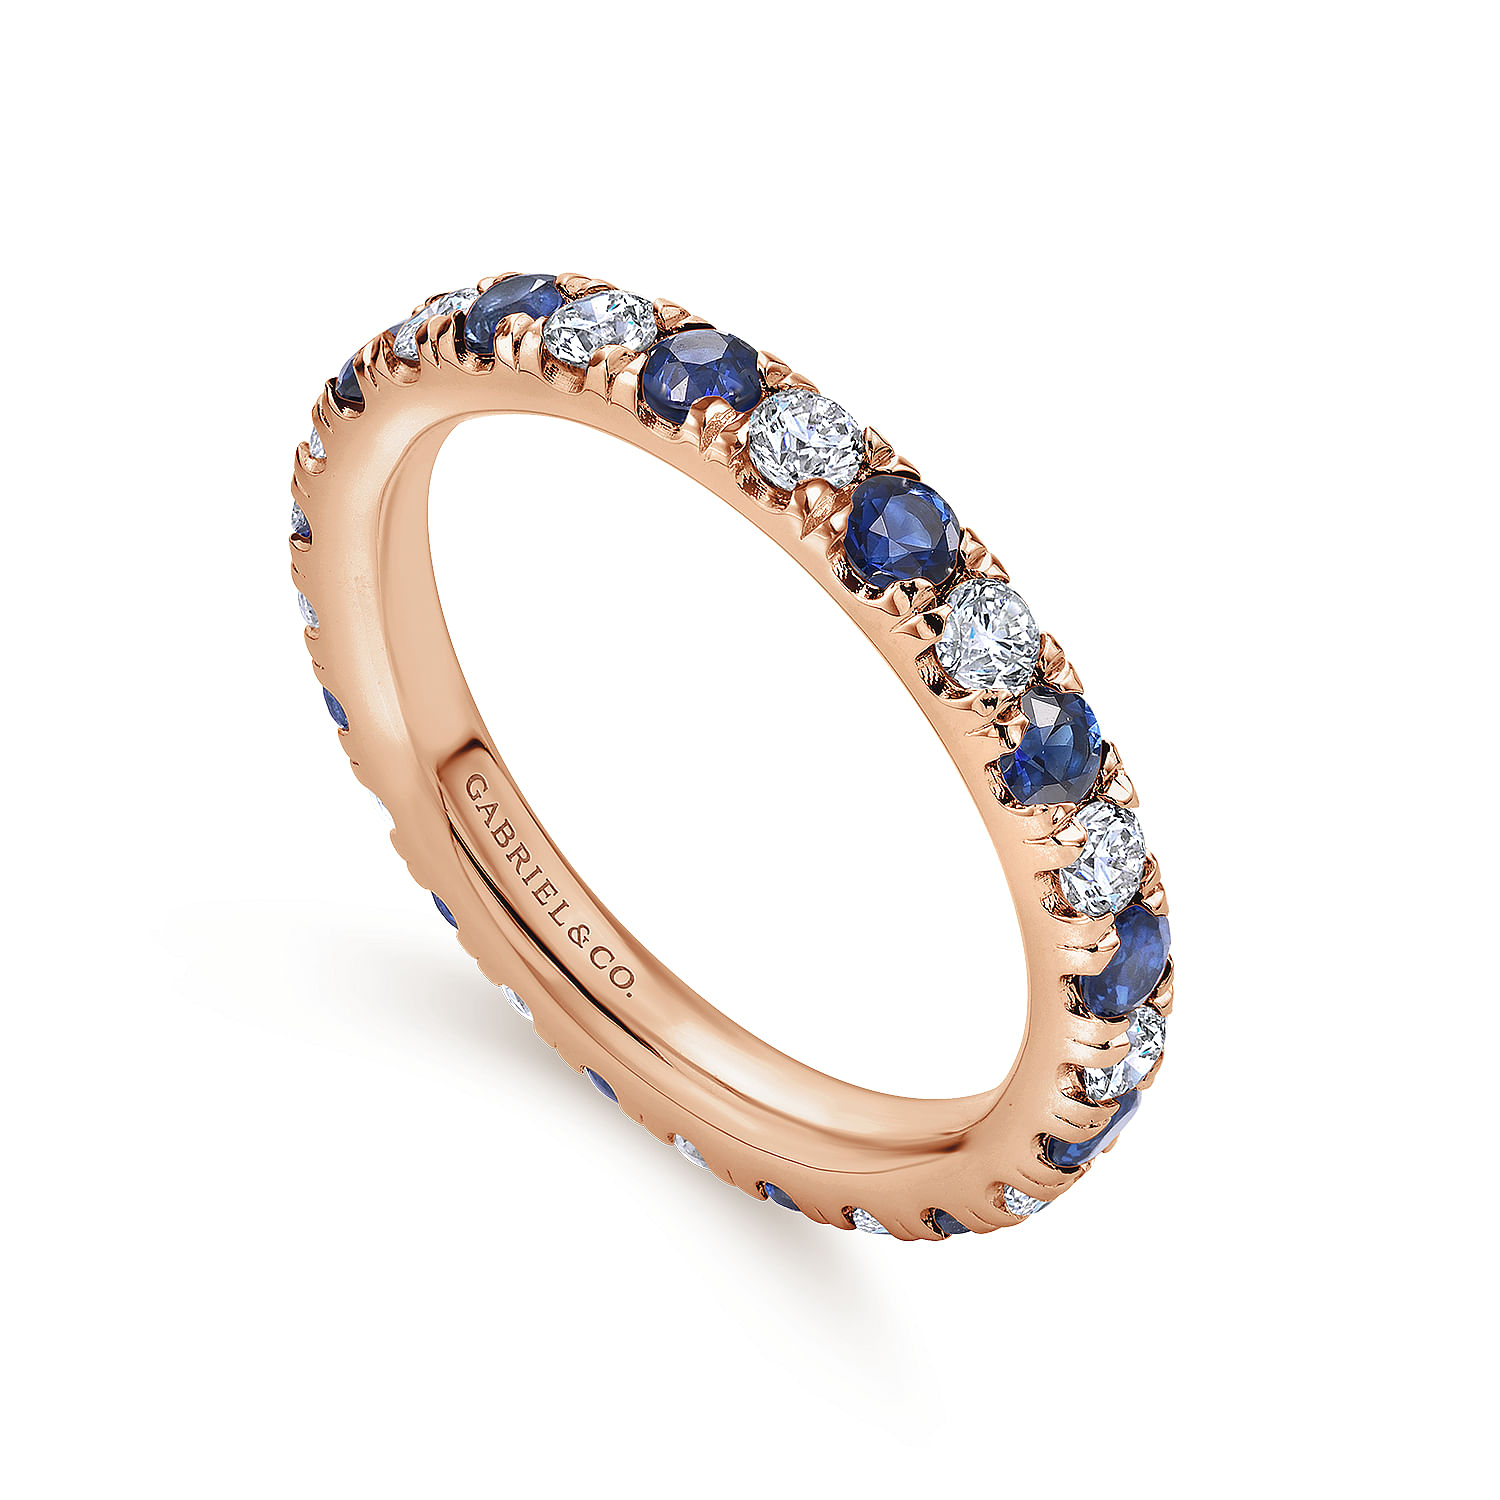 Bari - French Pave  Eternity Sapphire and Diamond Ring in 14K Rose Gold - 0.73 ct - Shot 3